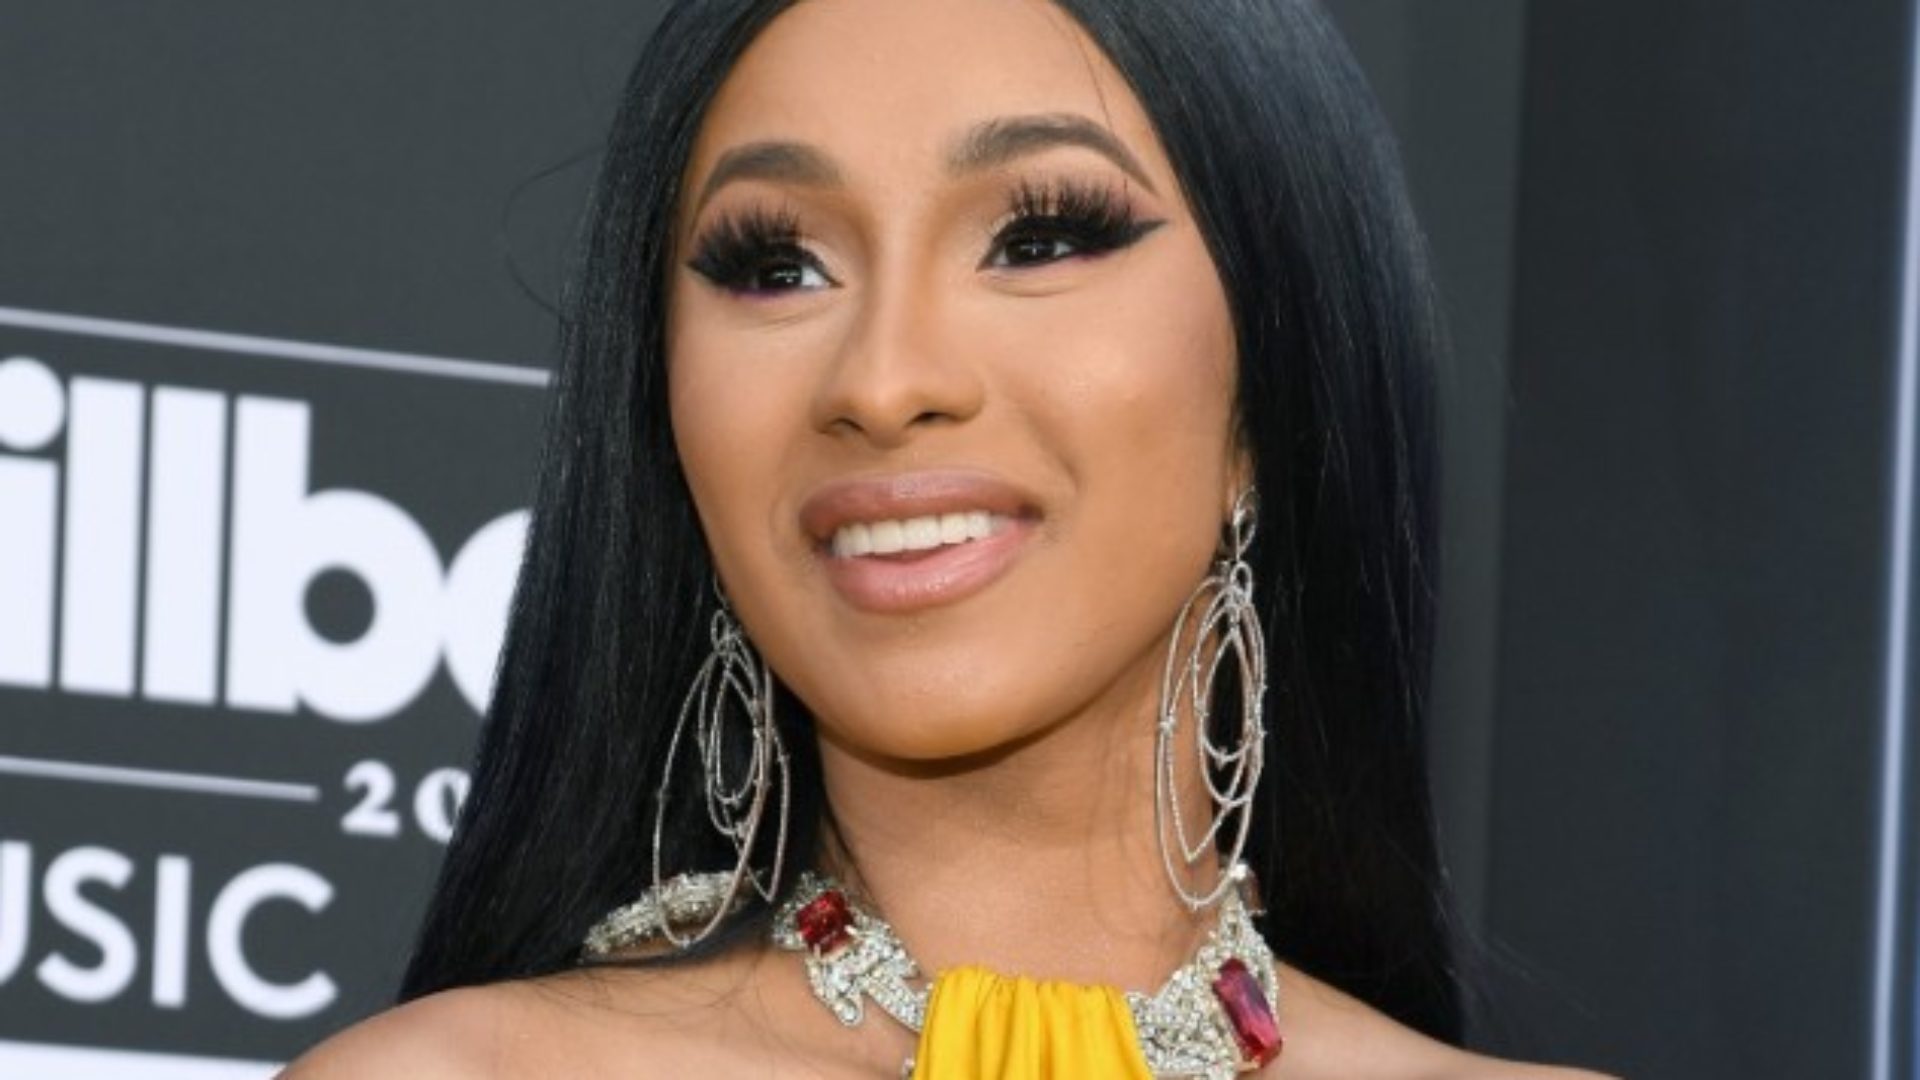 Cardi B May Be Starting A Beauty Trend With Her ‘Press’ Video